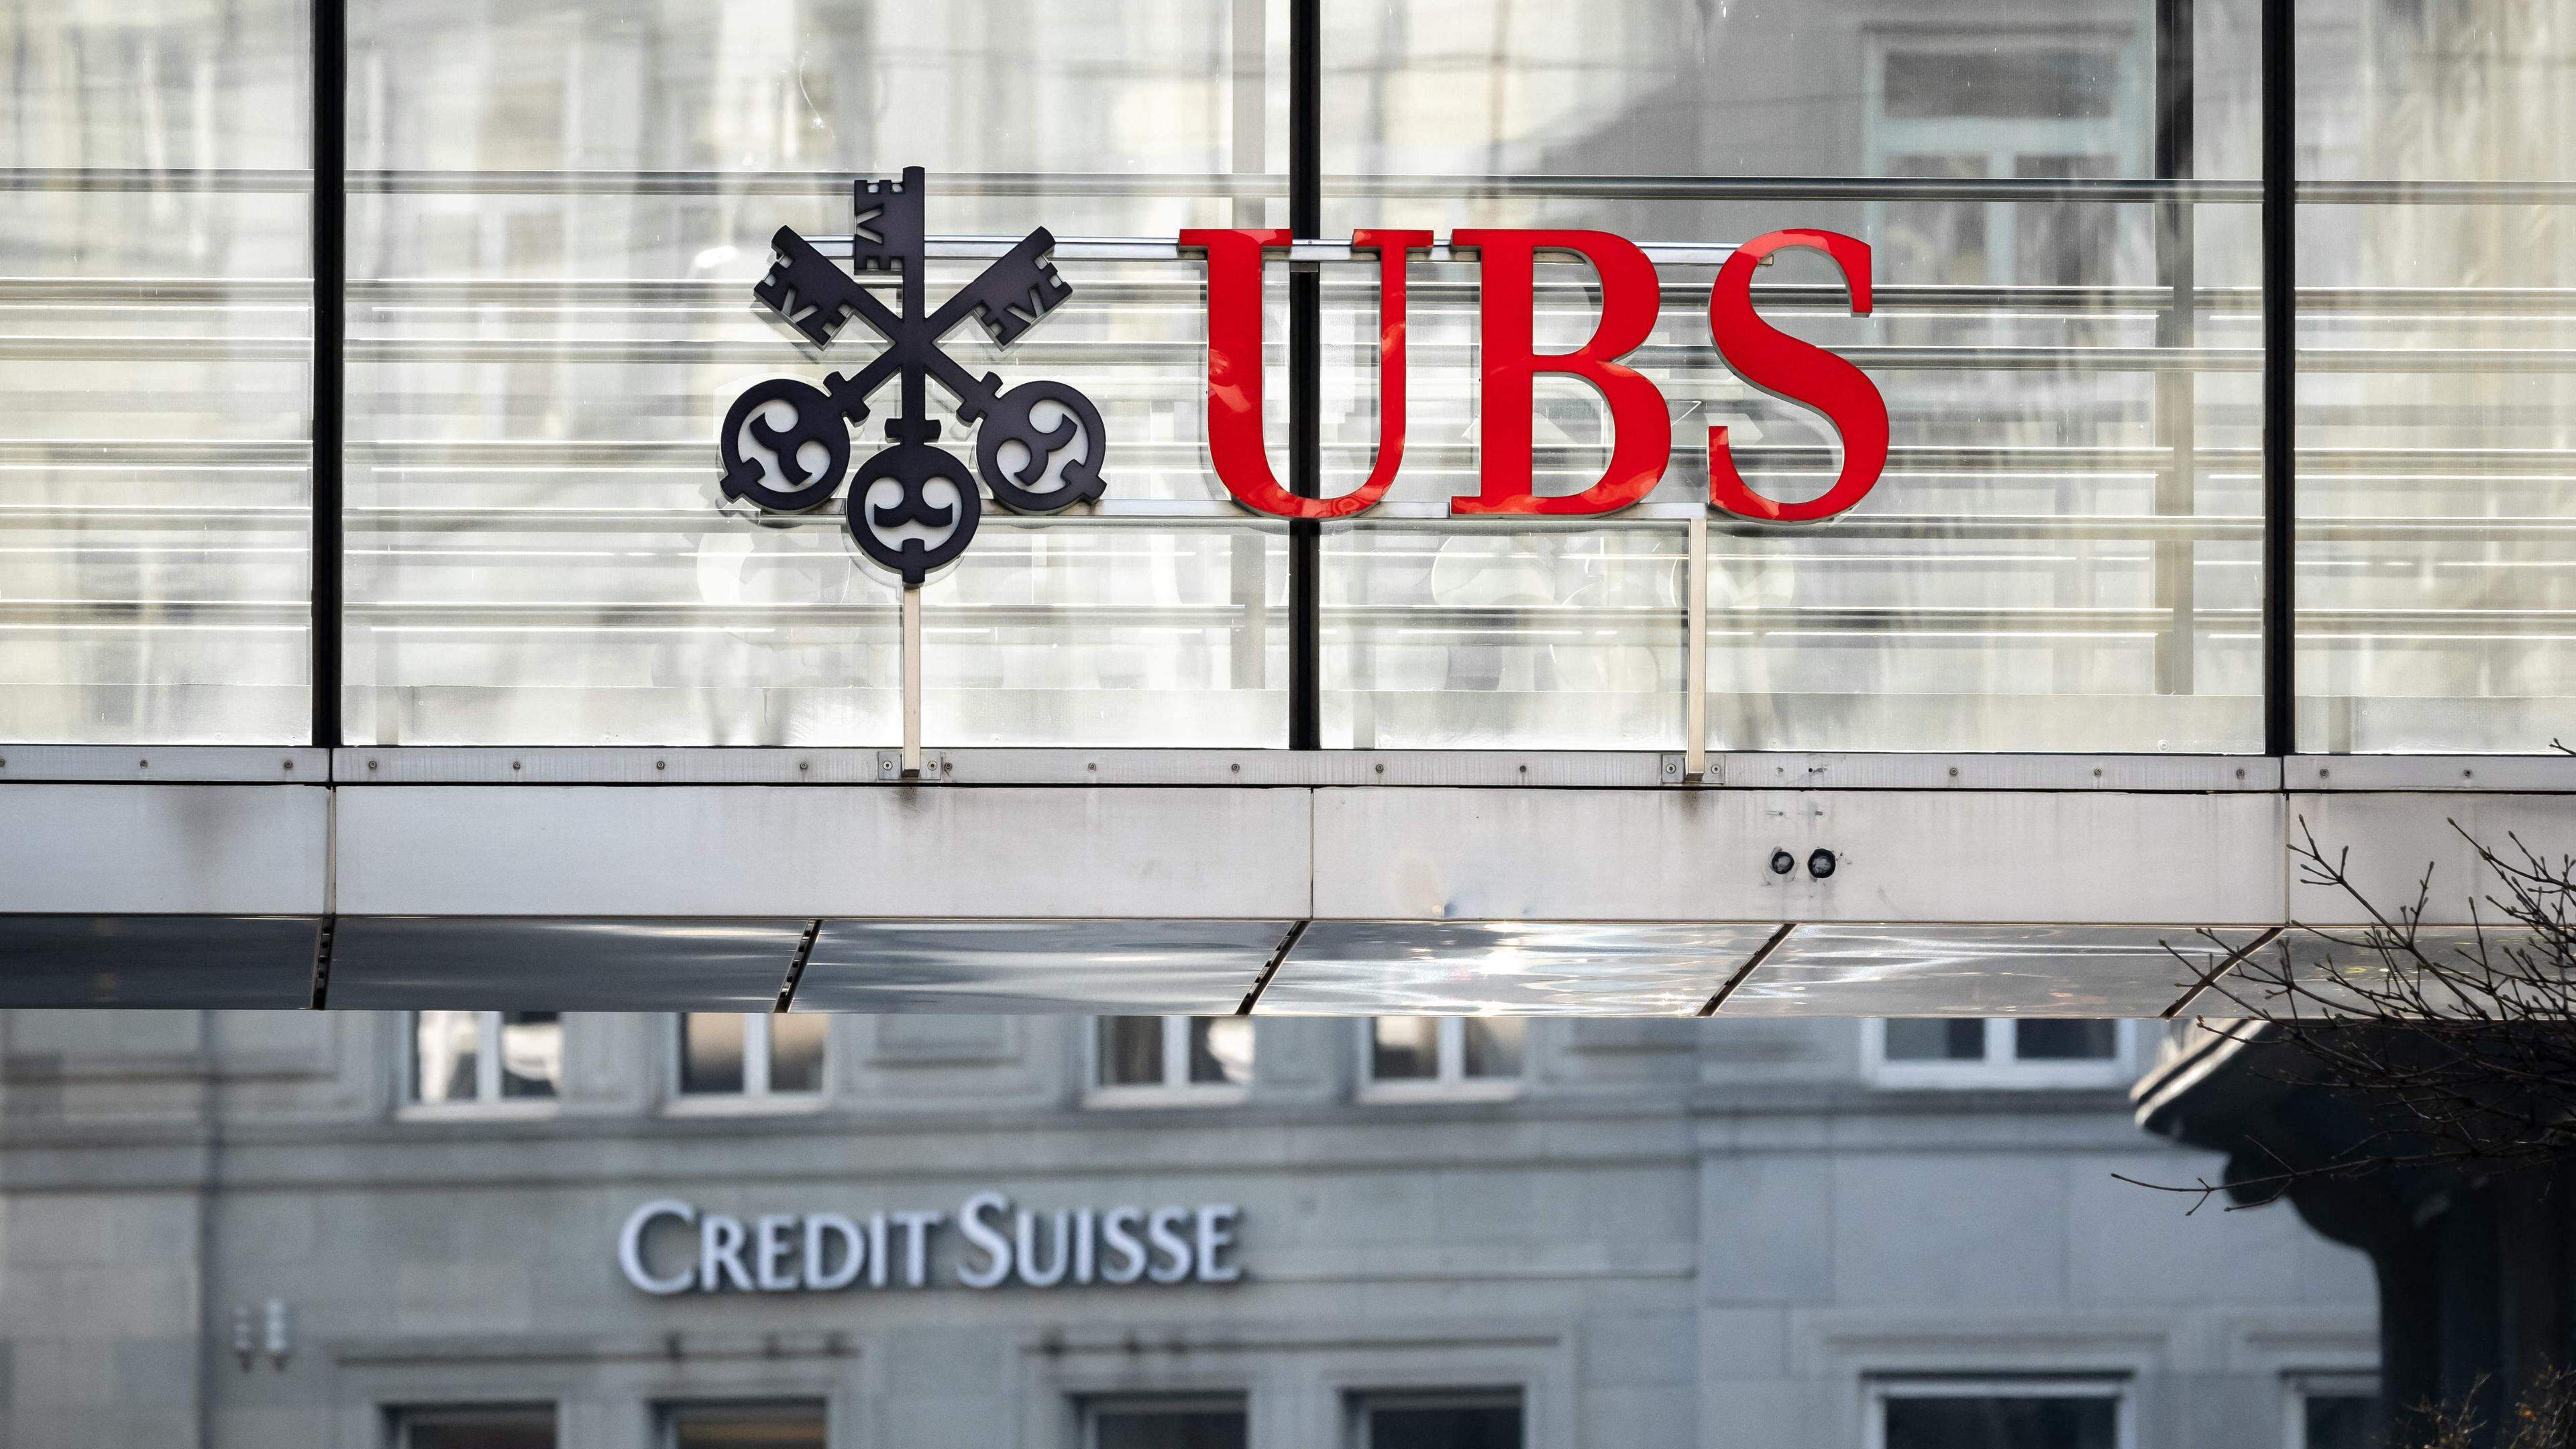 A sign and logo of Credit Suisse bank is seen beneath a sign of Swiss giant banking UBS in Zurich on March 20, 2023. - Shares in European banks sank on March 20, 2022 despite a buyout of Credit Suisse by Swiss lender UBS aimed at preventing a global banking crisis. (Photo by Fabrice COFFRINI / AFP)